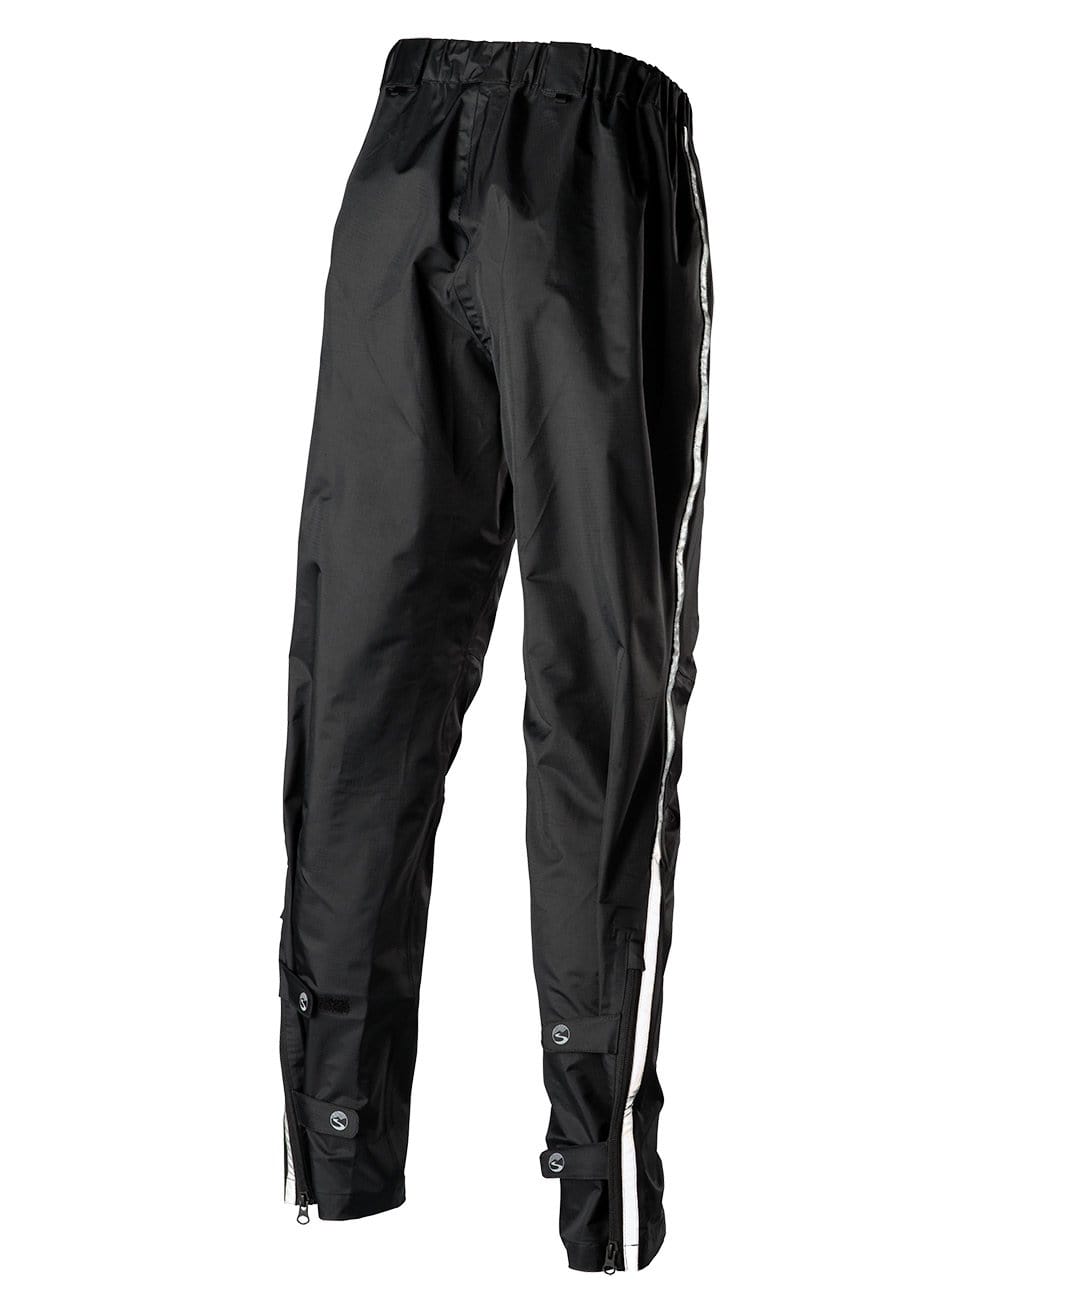  Showers Pass Men's Transit Pants - Waterproof & Breathable  Rain Gear - Ultralight & Packable for Outdoor Activities - Black Color -  X-Small : Clothing, Shoes & Jewelry